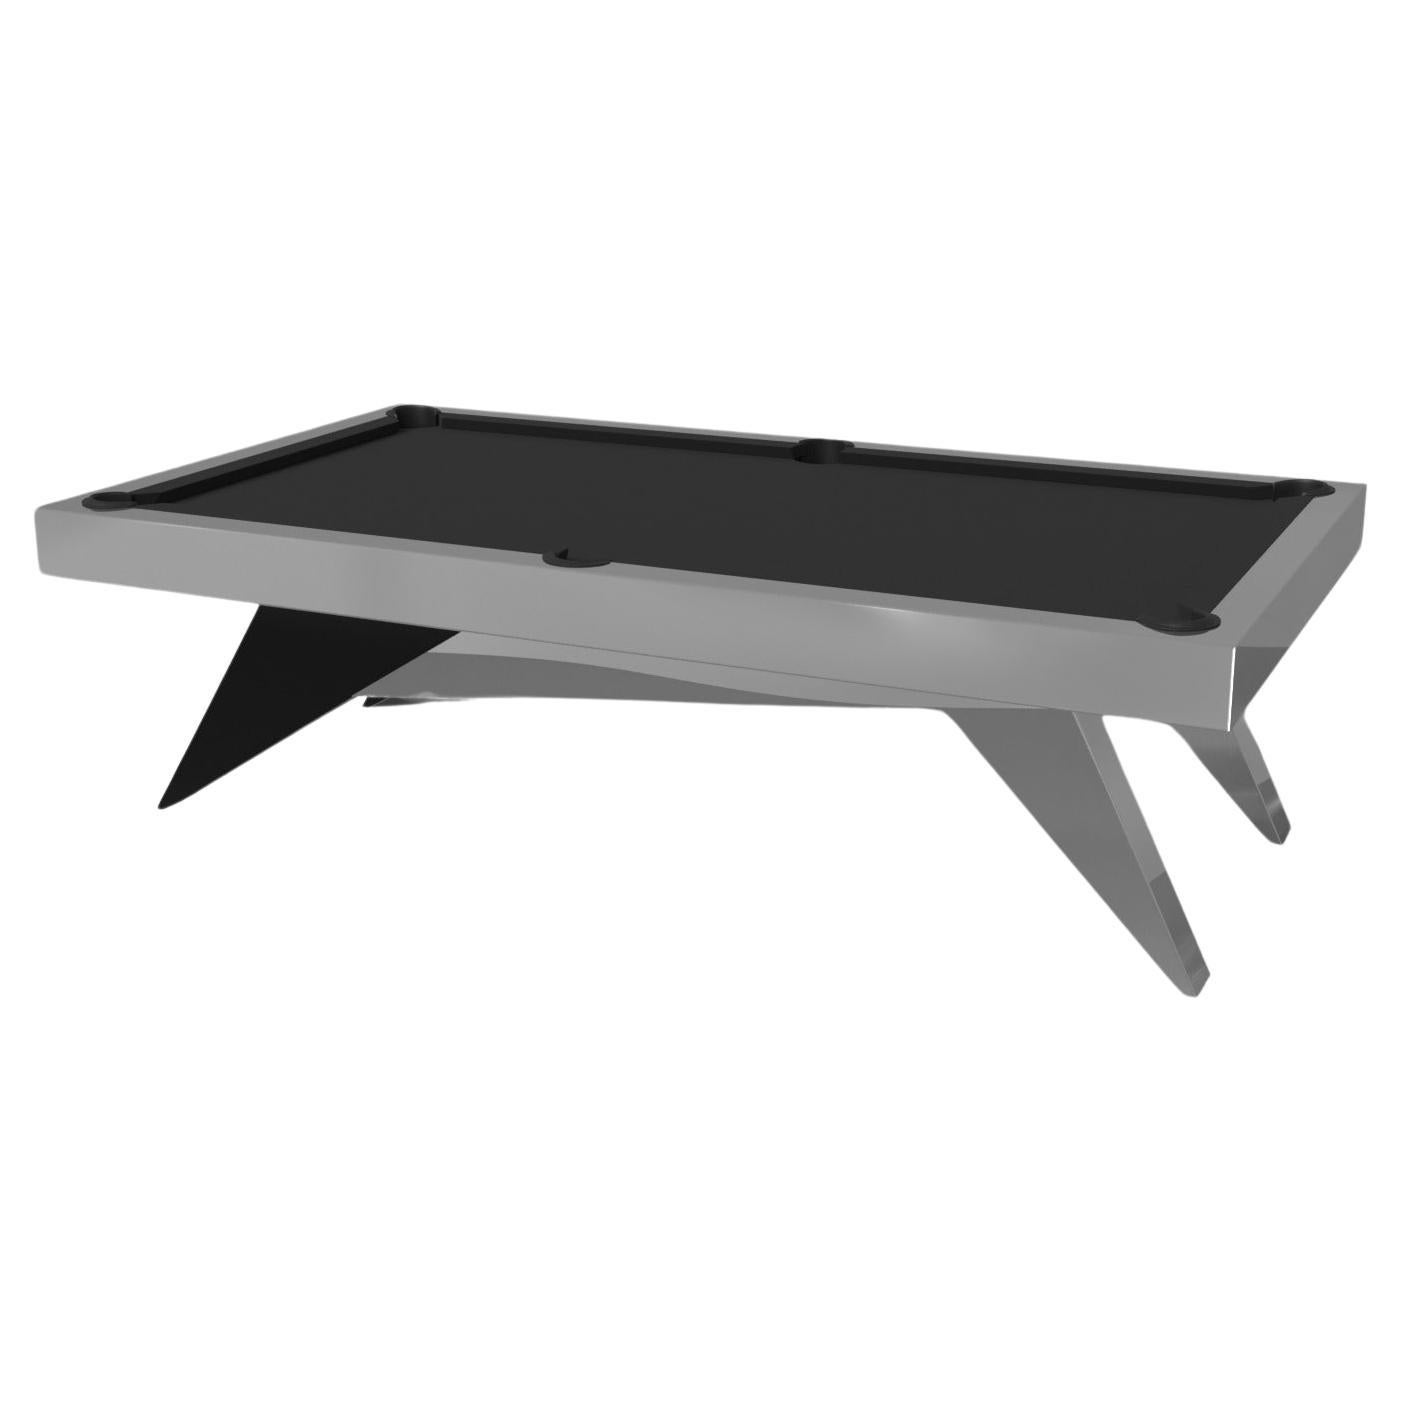 Elevate Customs Mantis Pool Table / Stainless Steel Metal in 8.5' - Made in USA For Sale